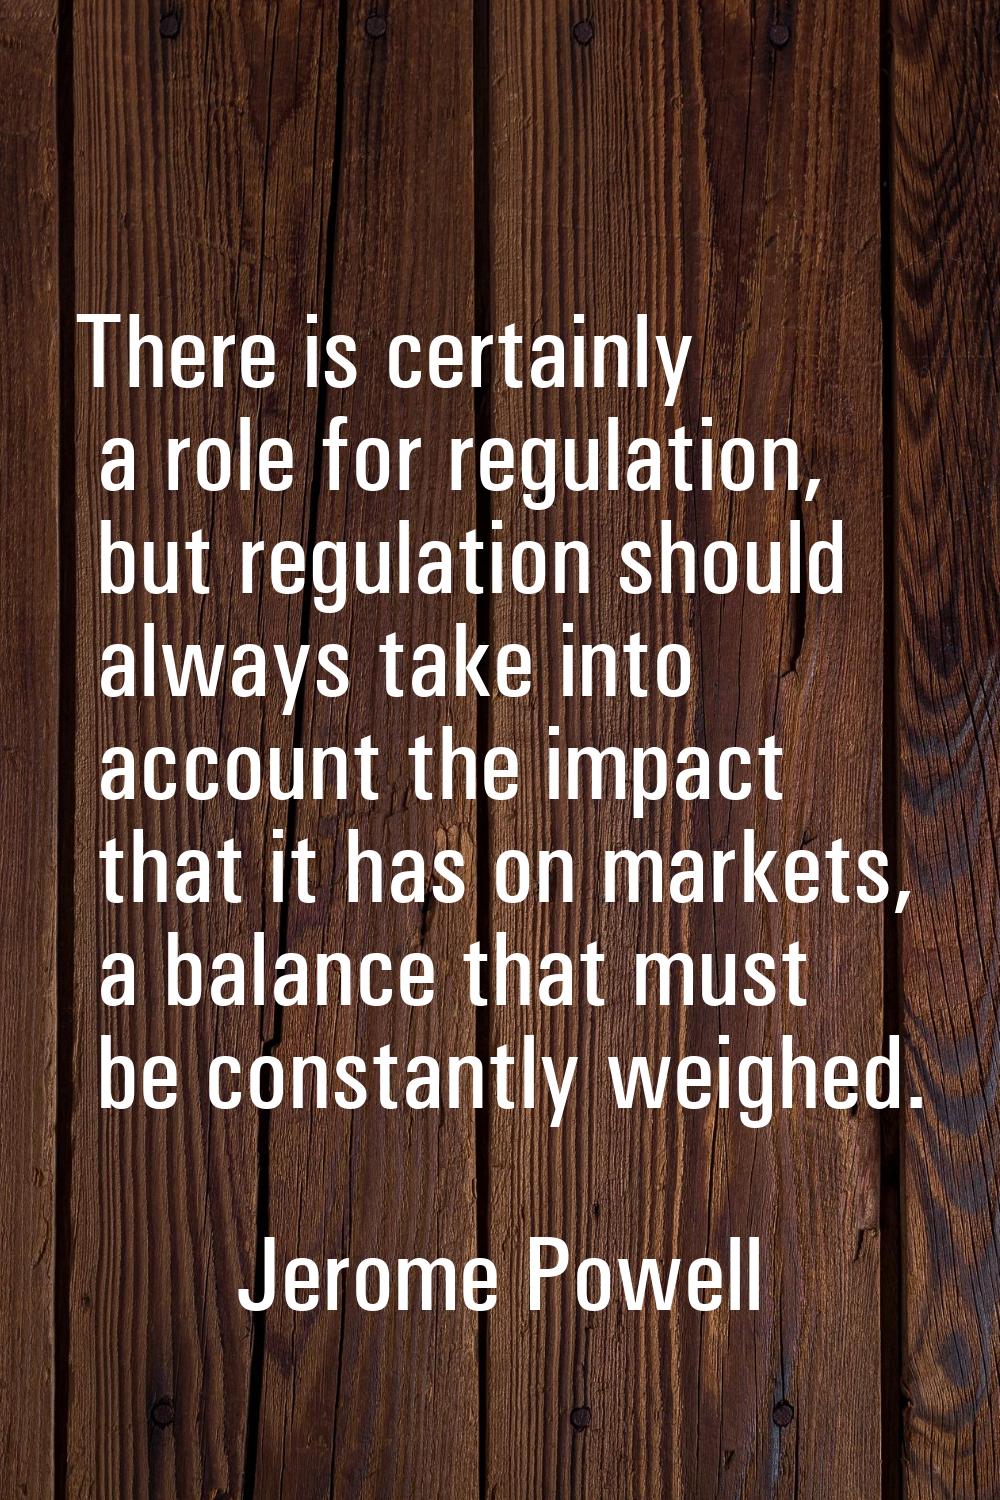 There is certainly a role for regulation, but regulation should always take into account the impact